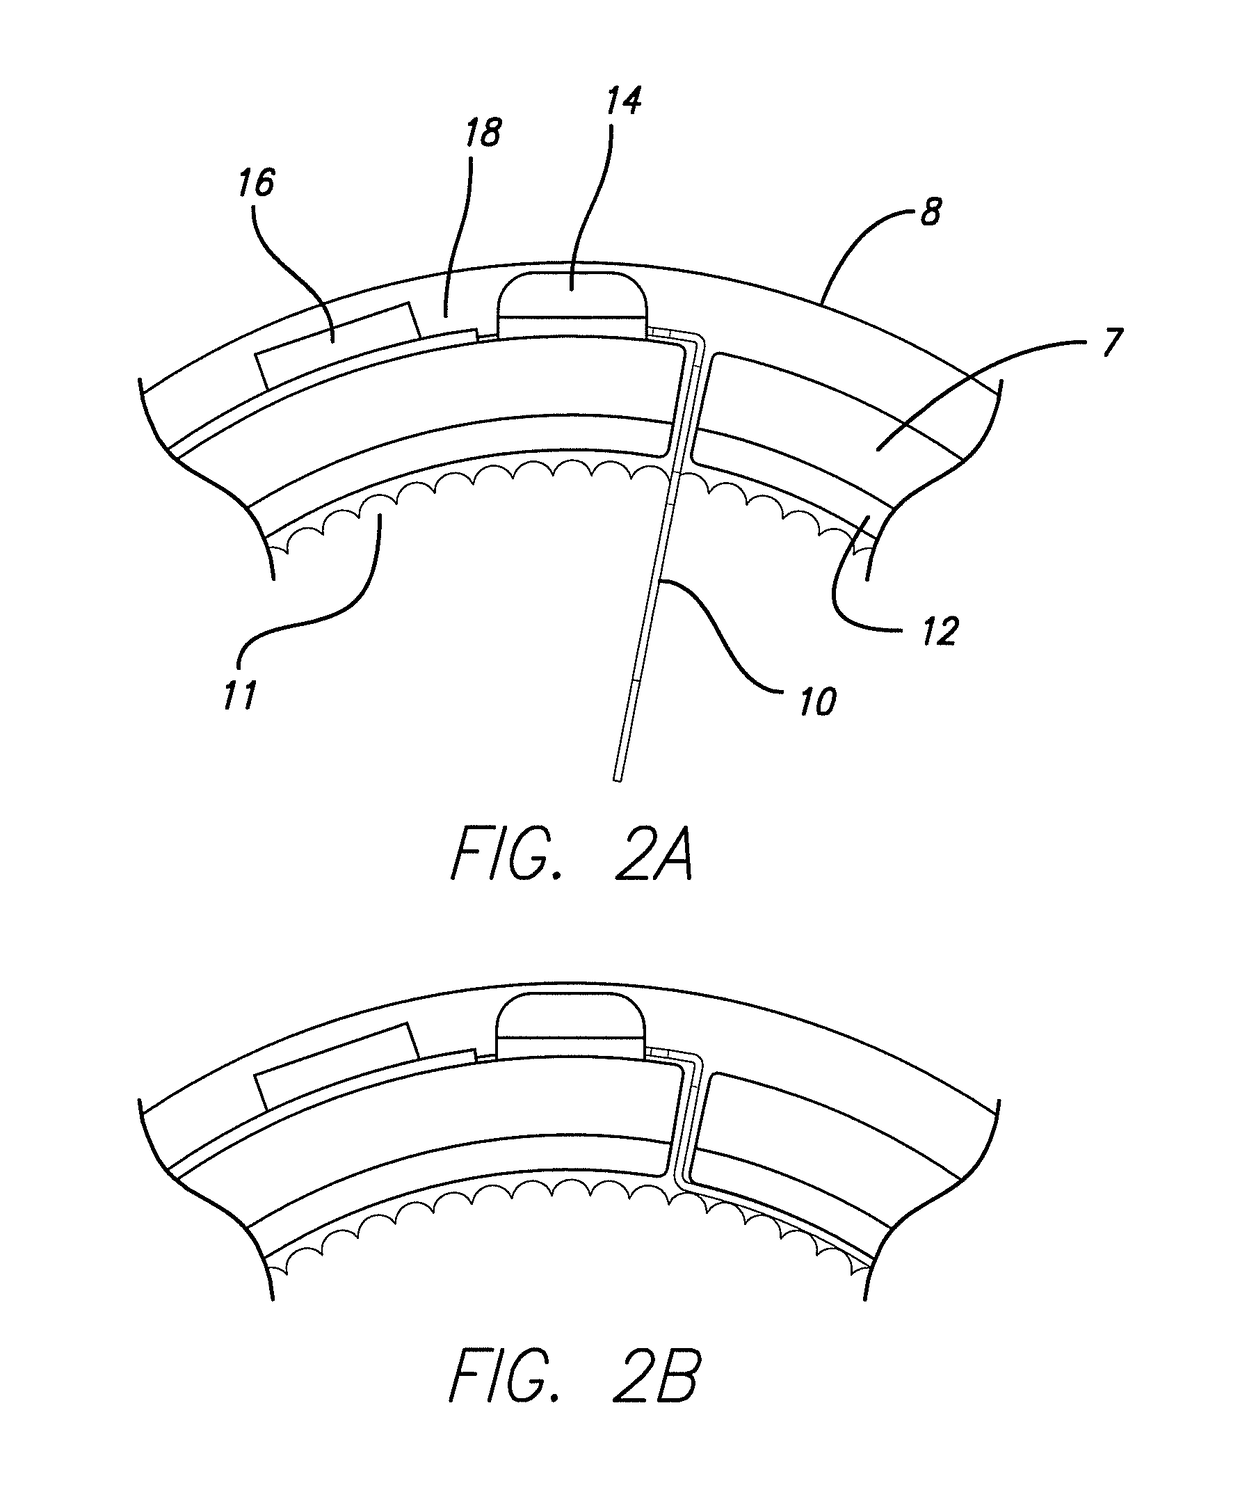 Cortical implant system for brain stimulation and recording